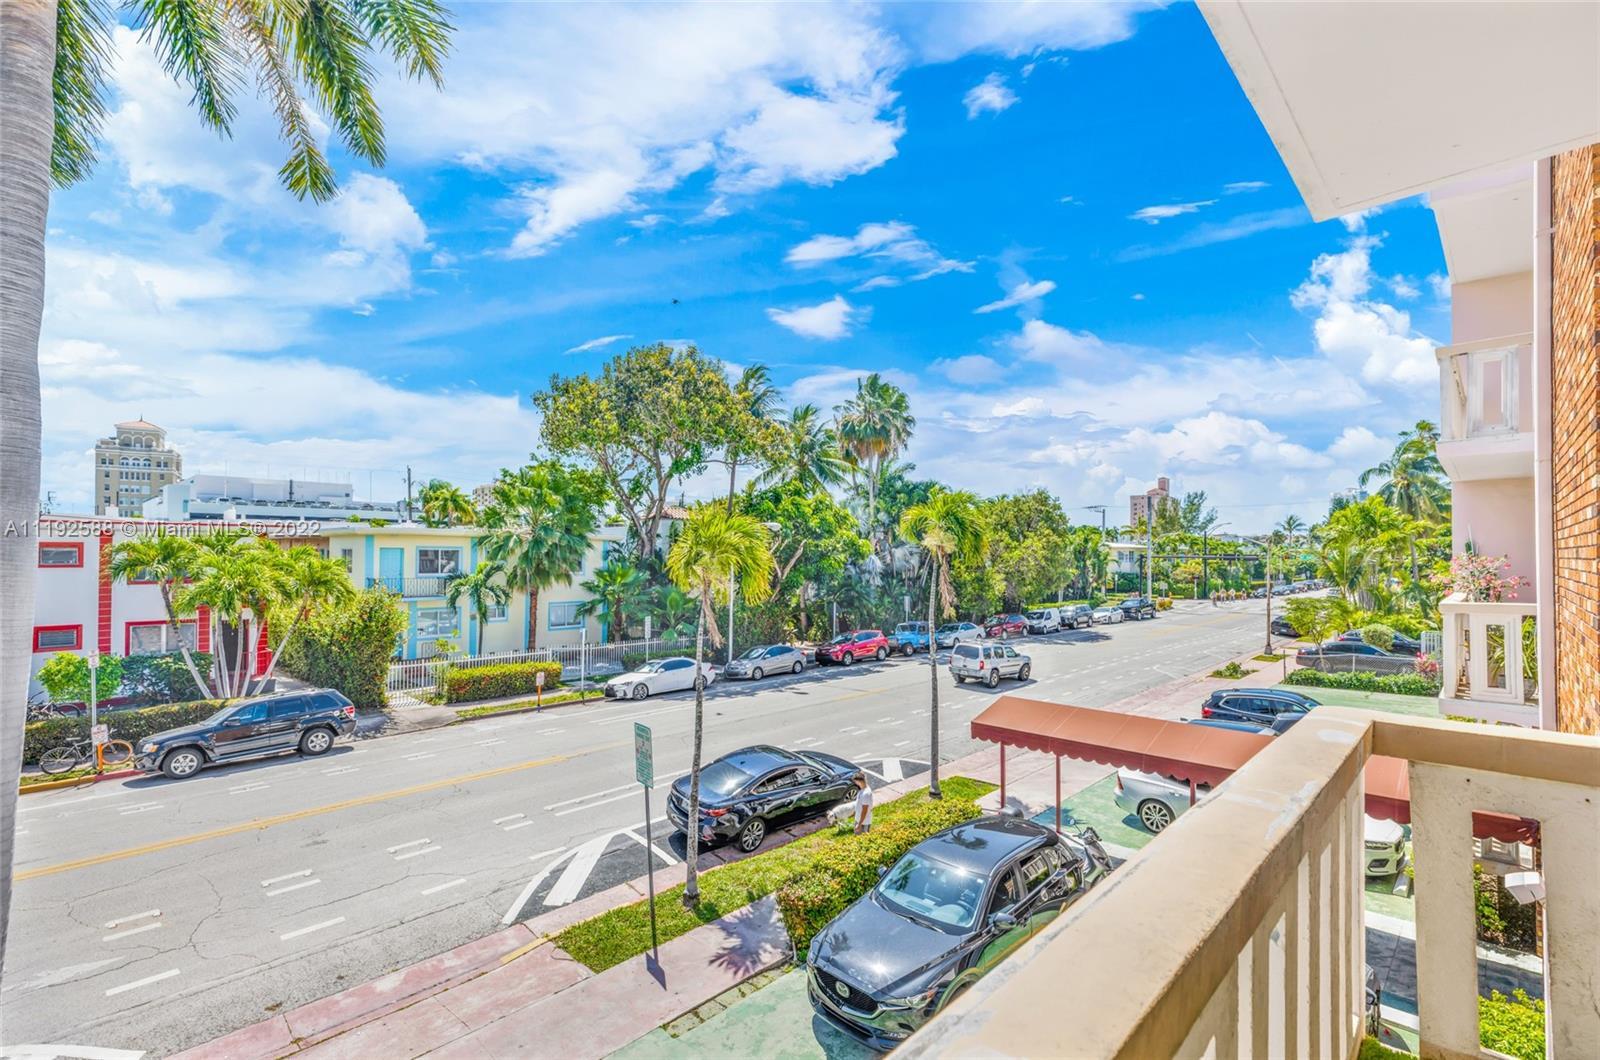 Best location in South Beach. Oversized 1bdr/1bath unit on second floor with a balcony! . 2 separate